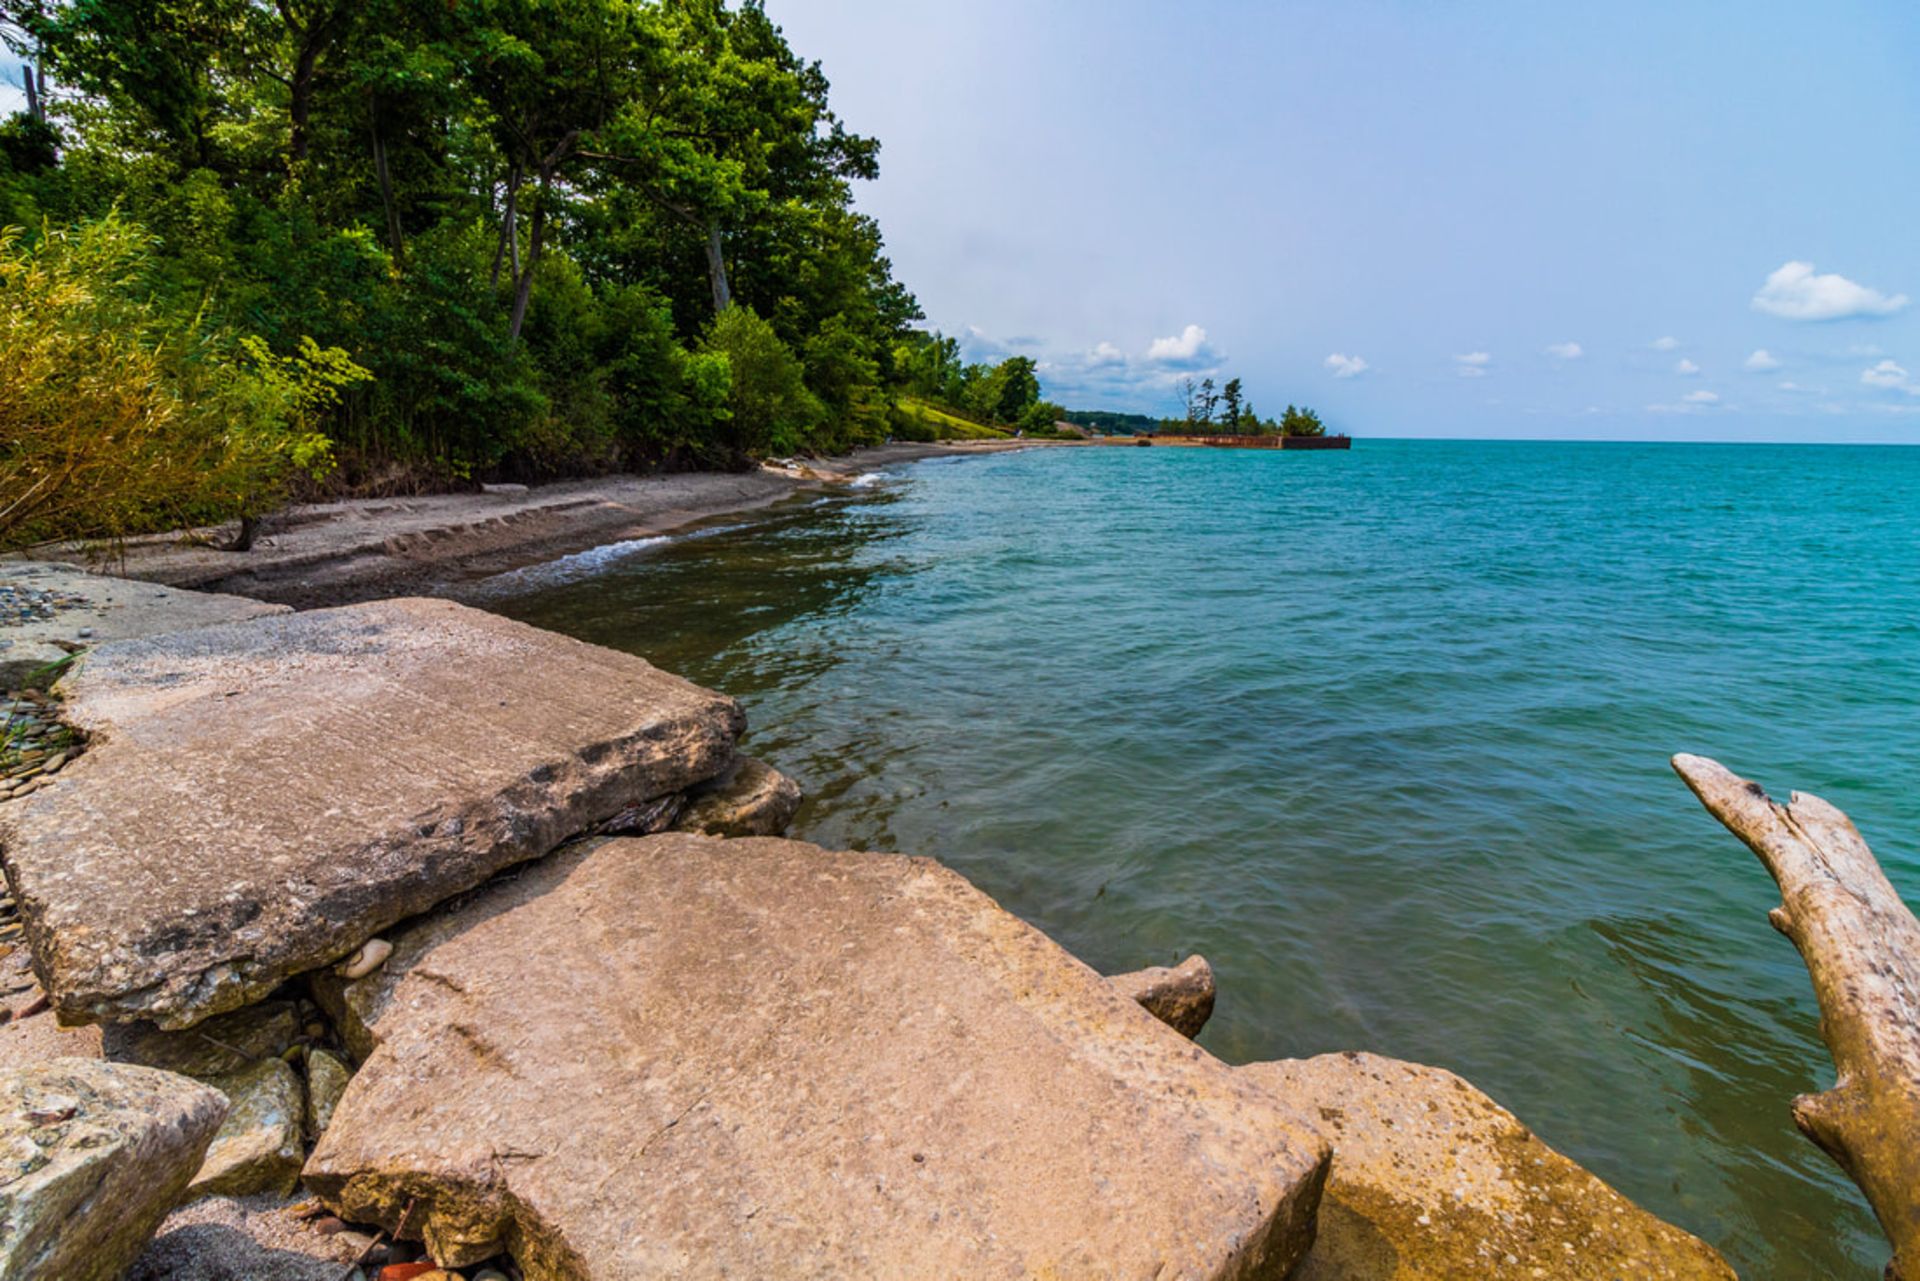 A Short Walk to the Breathtaking Lake Erie in the Northern Shores Community of Michigan! - Image 6 of 15